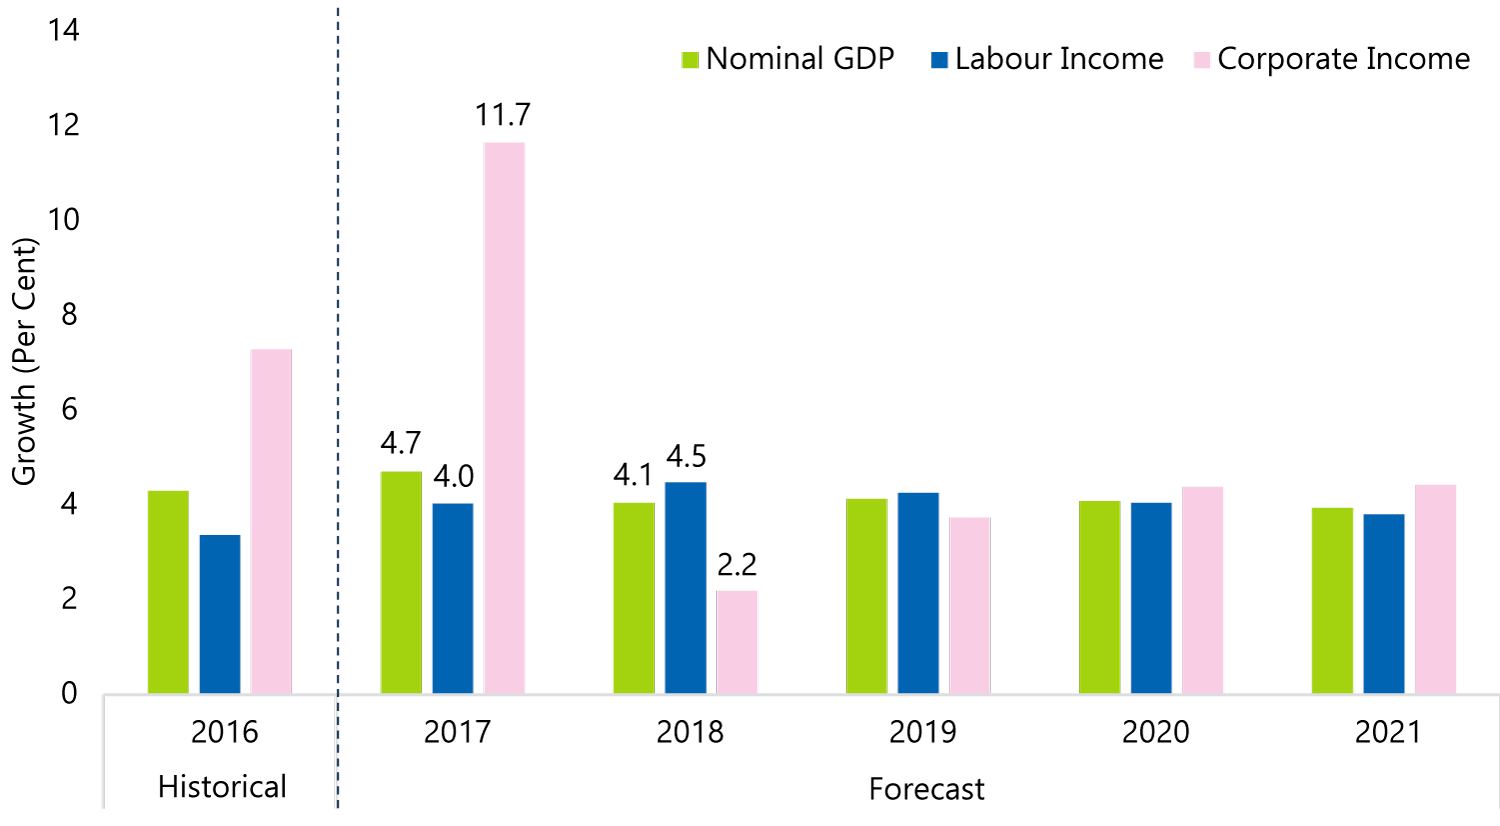 Corporate Income Leads Nominal GDP Growth in 2017